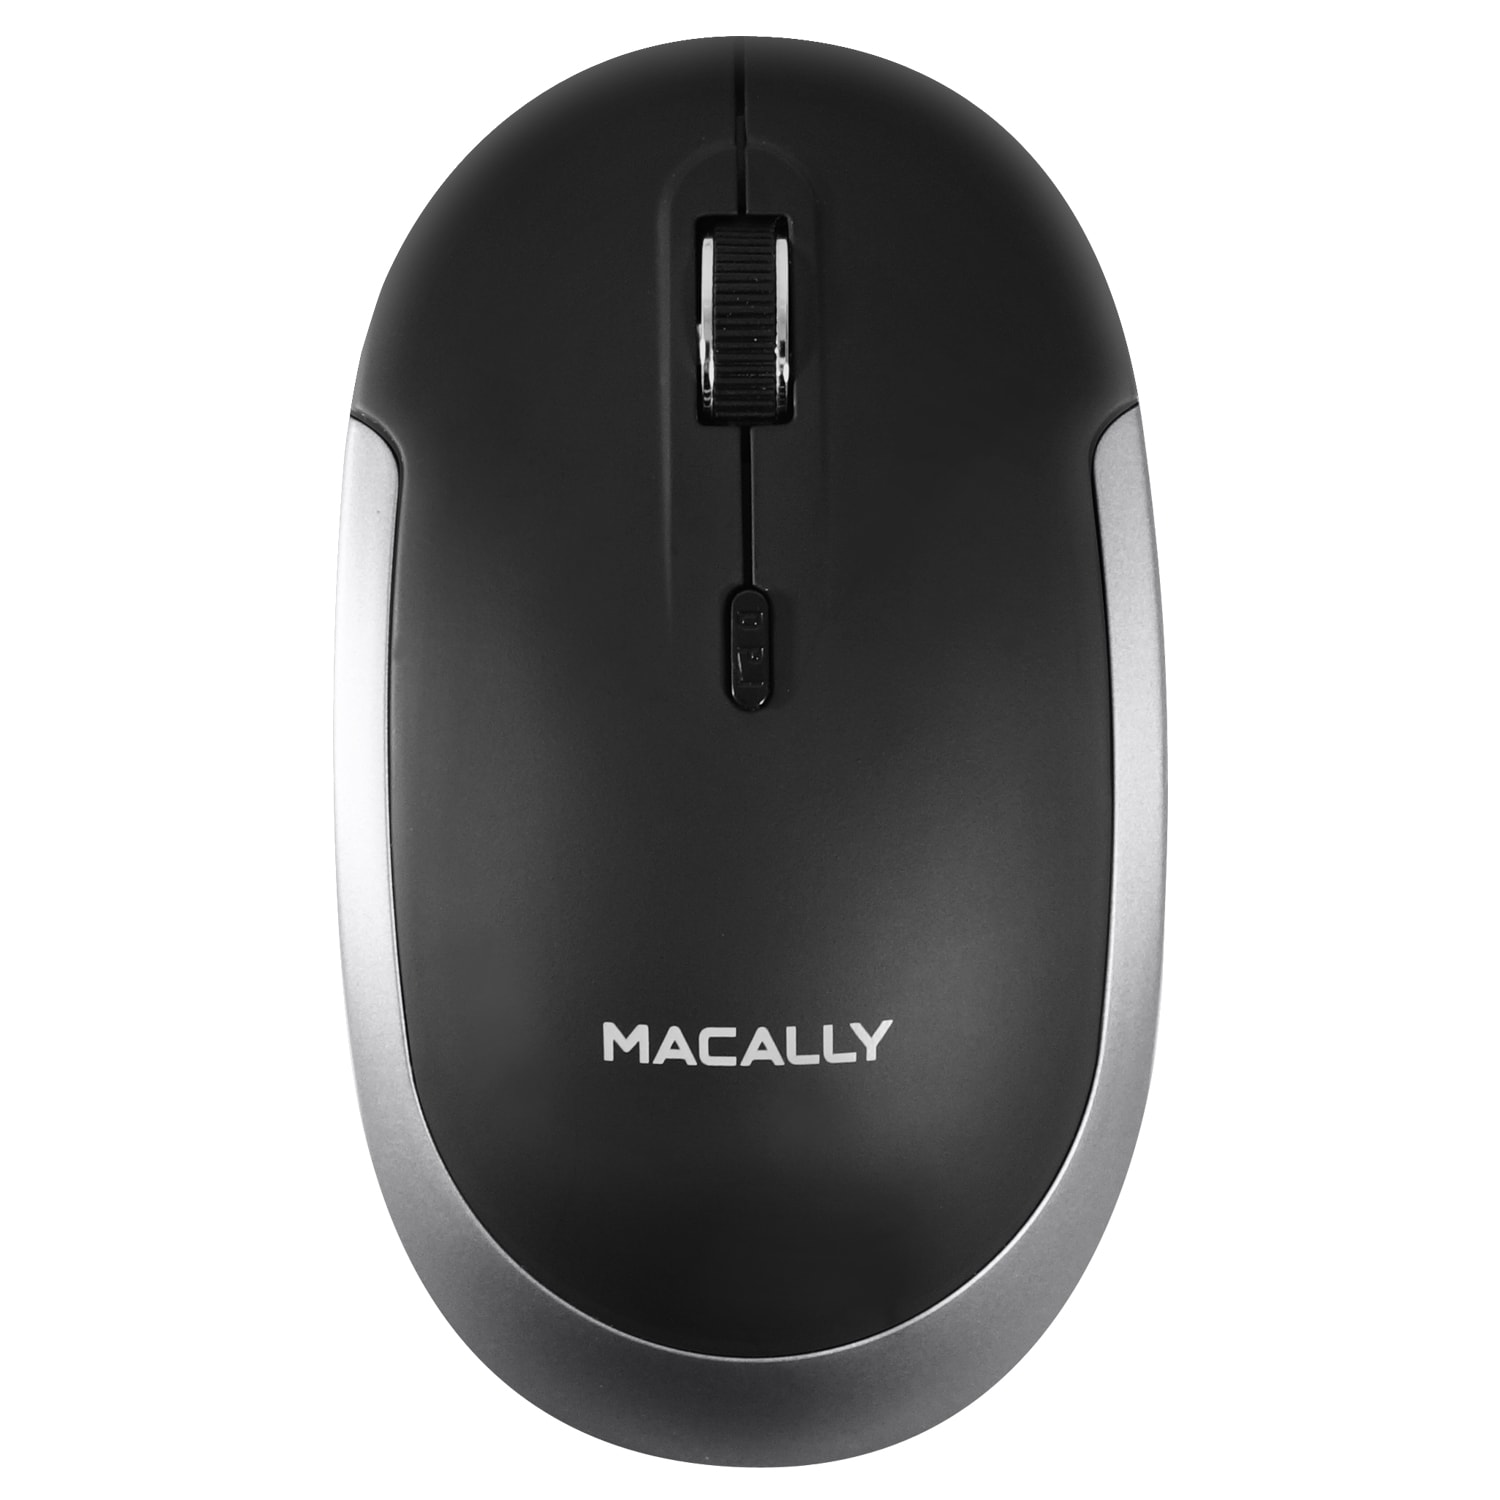 hoorbaar Stun vertel het me Macally Macally Silent Wireless Bluetooth Mouse for Apple Mac or Windows PC  Laptop/Desktop Computer, Slim & Compact Mice Design with Optical Sensor &  DPI Switch 800/1200/1600, Small for Easy Travel, Black(BTDYNAMOUSE) in